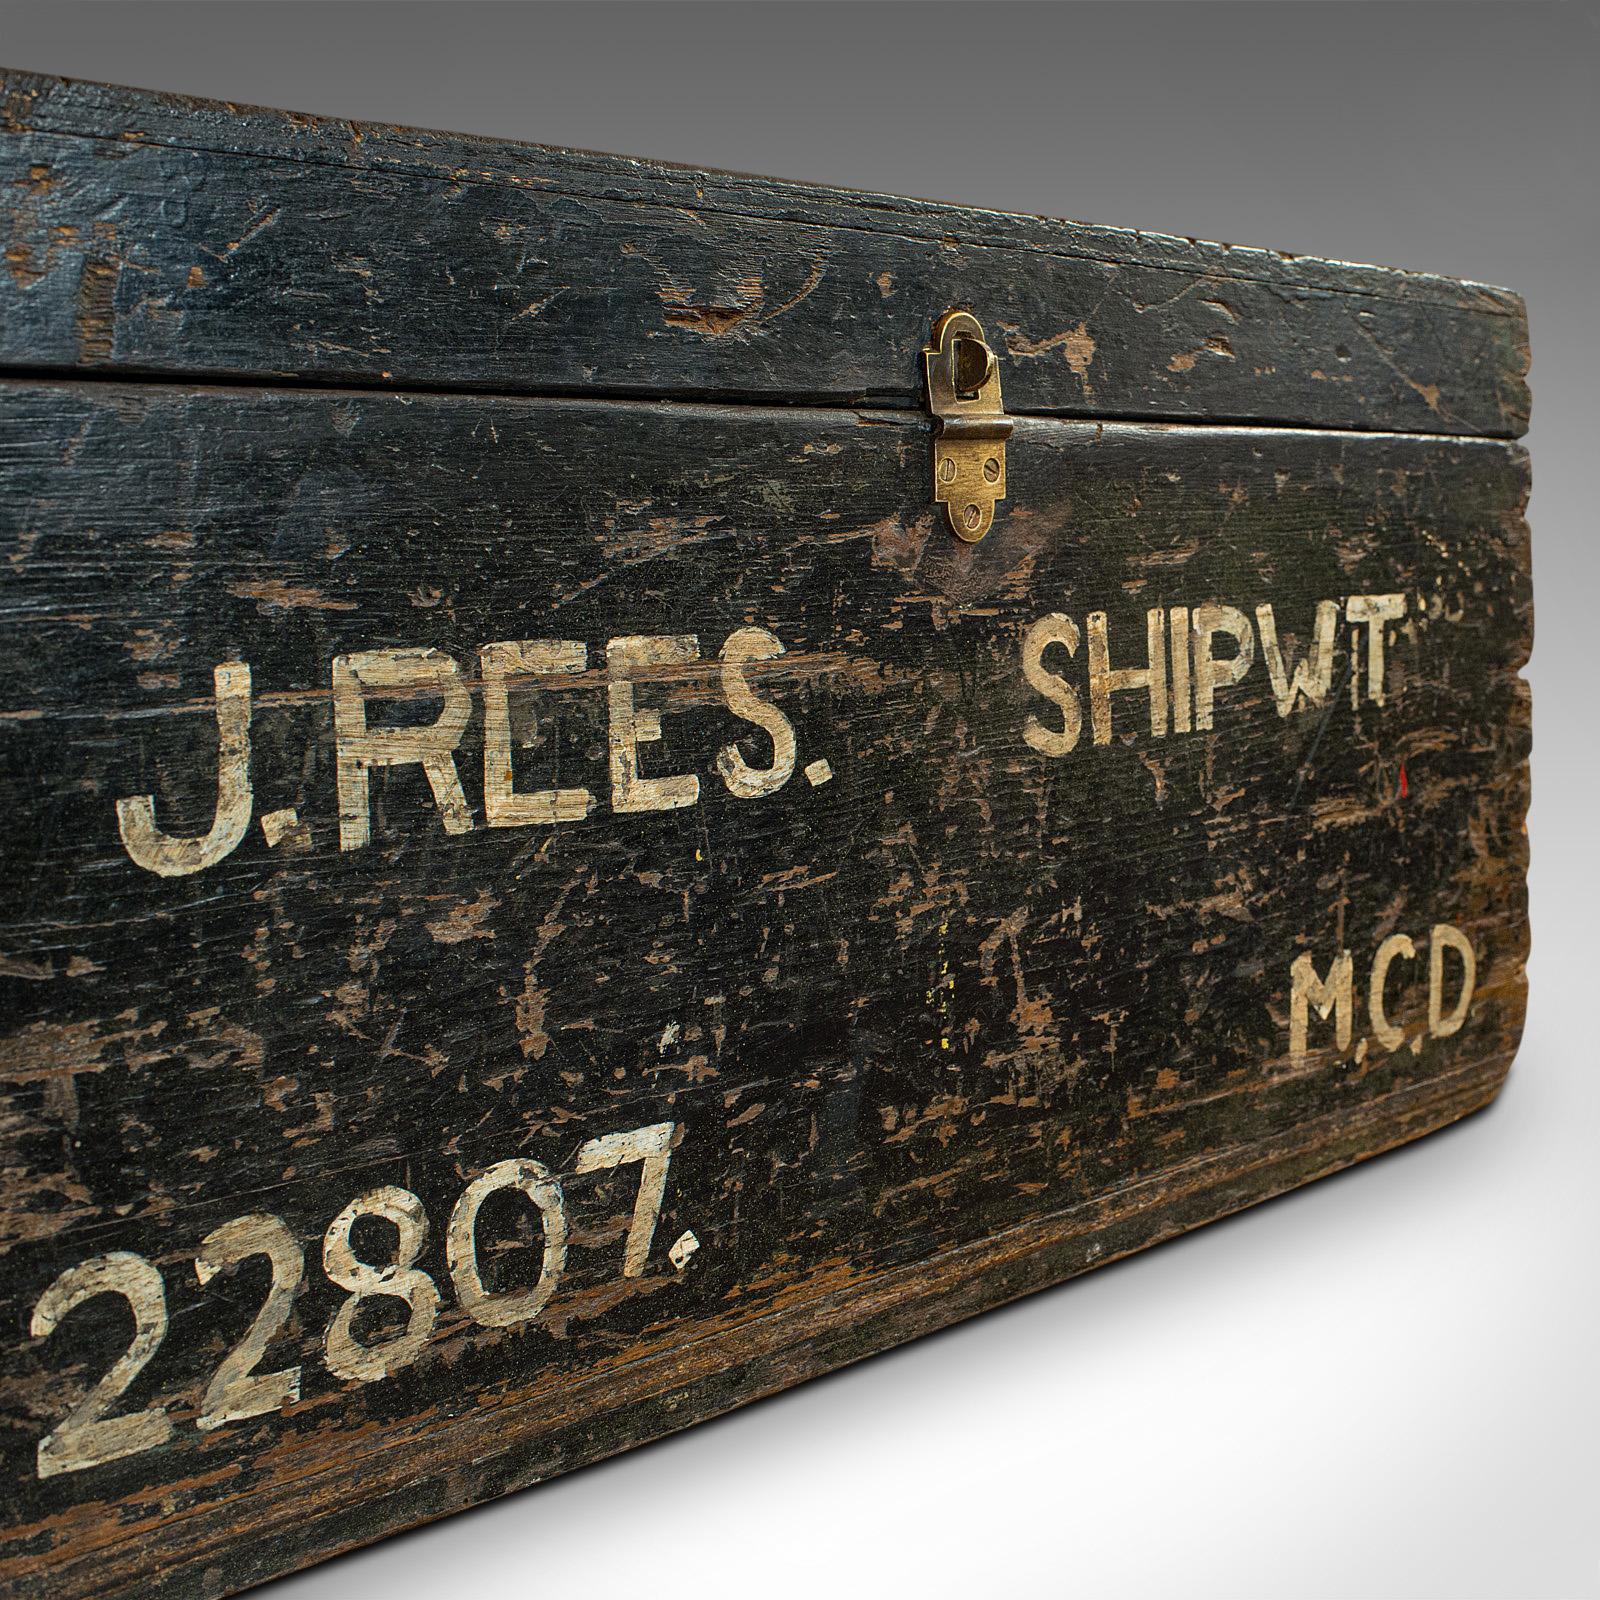 Antique Shipwright's Chest, English, Craftsman's Tool Trunk, Victorian, 1900 5